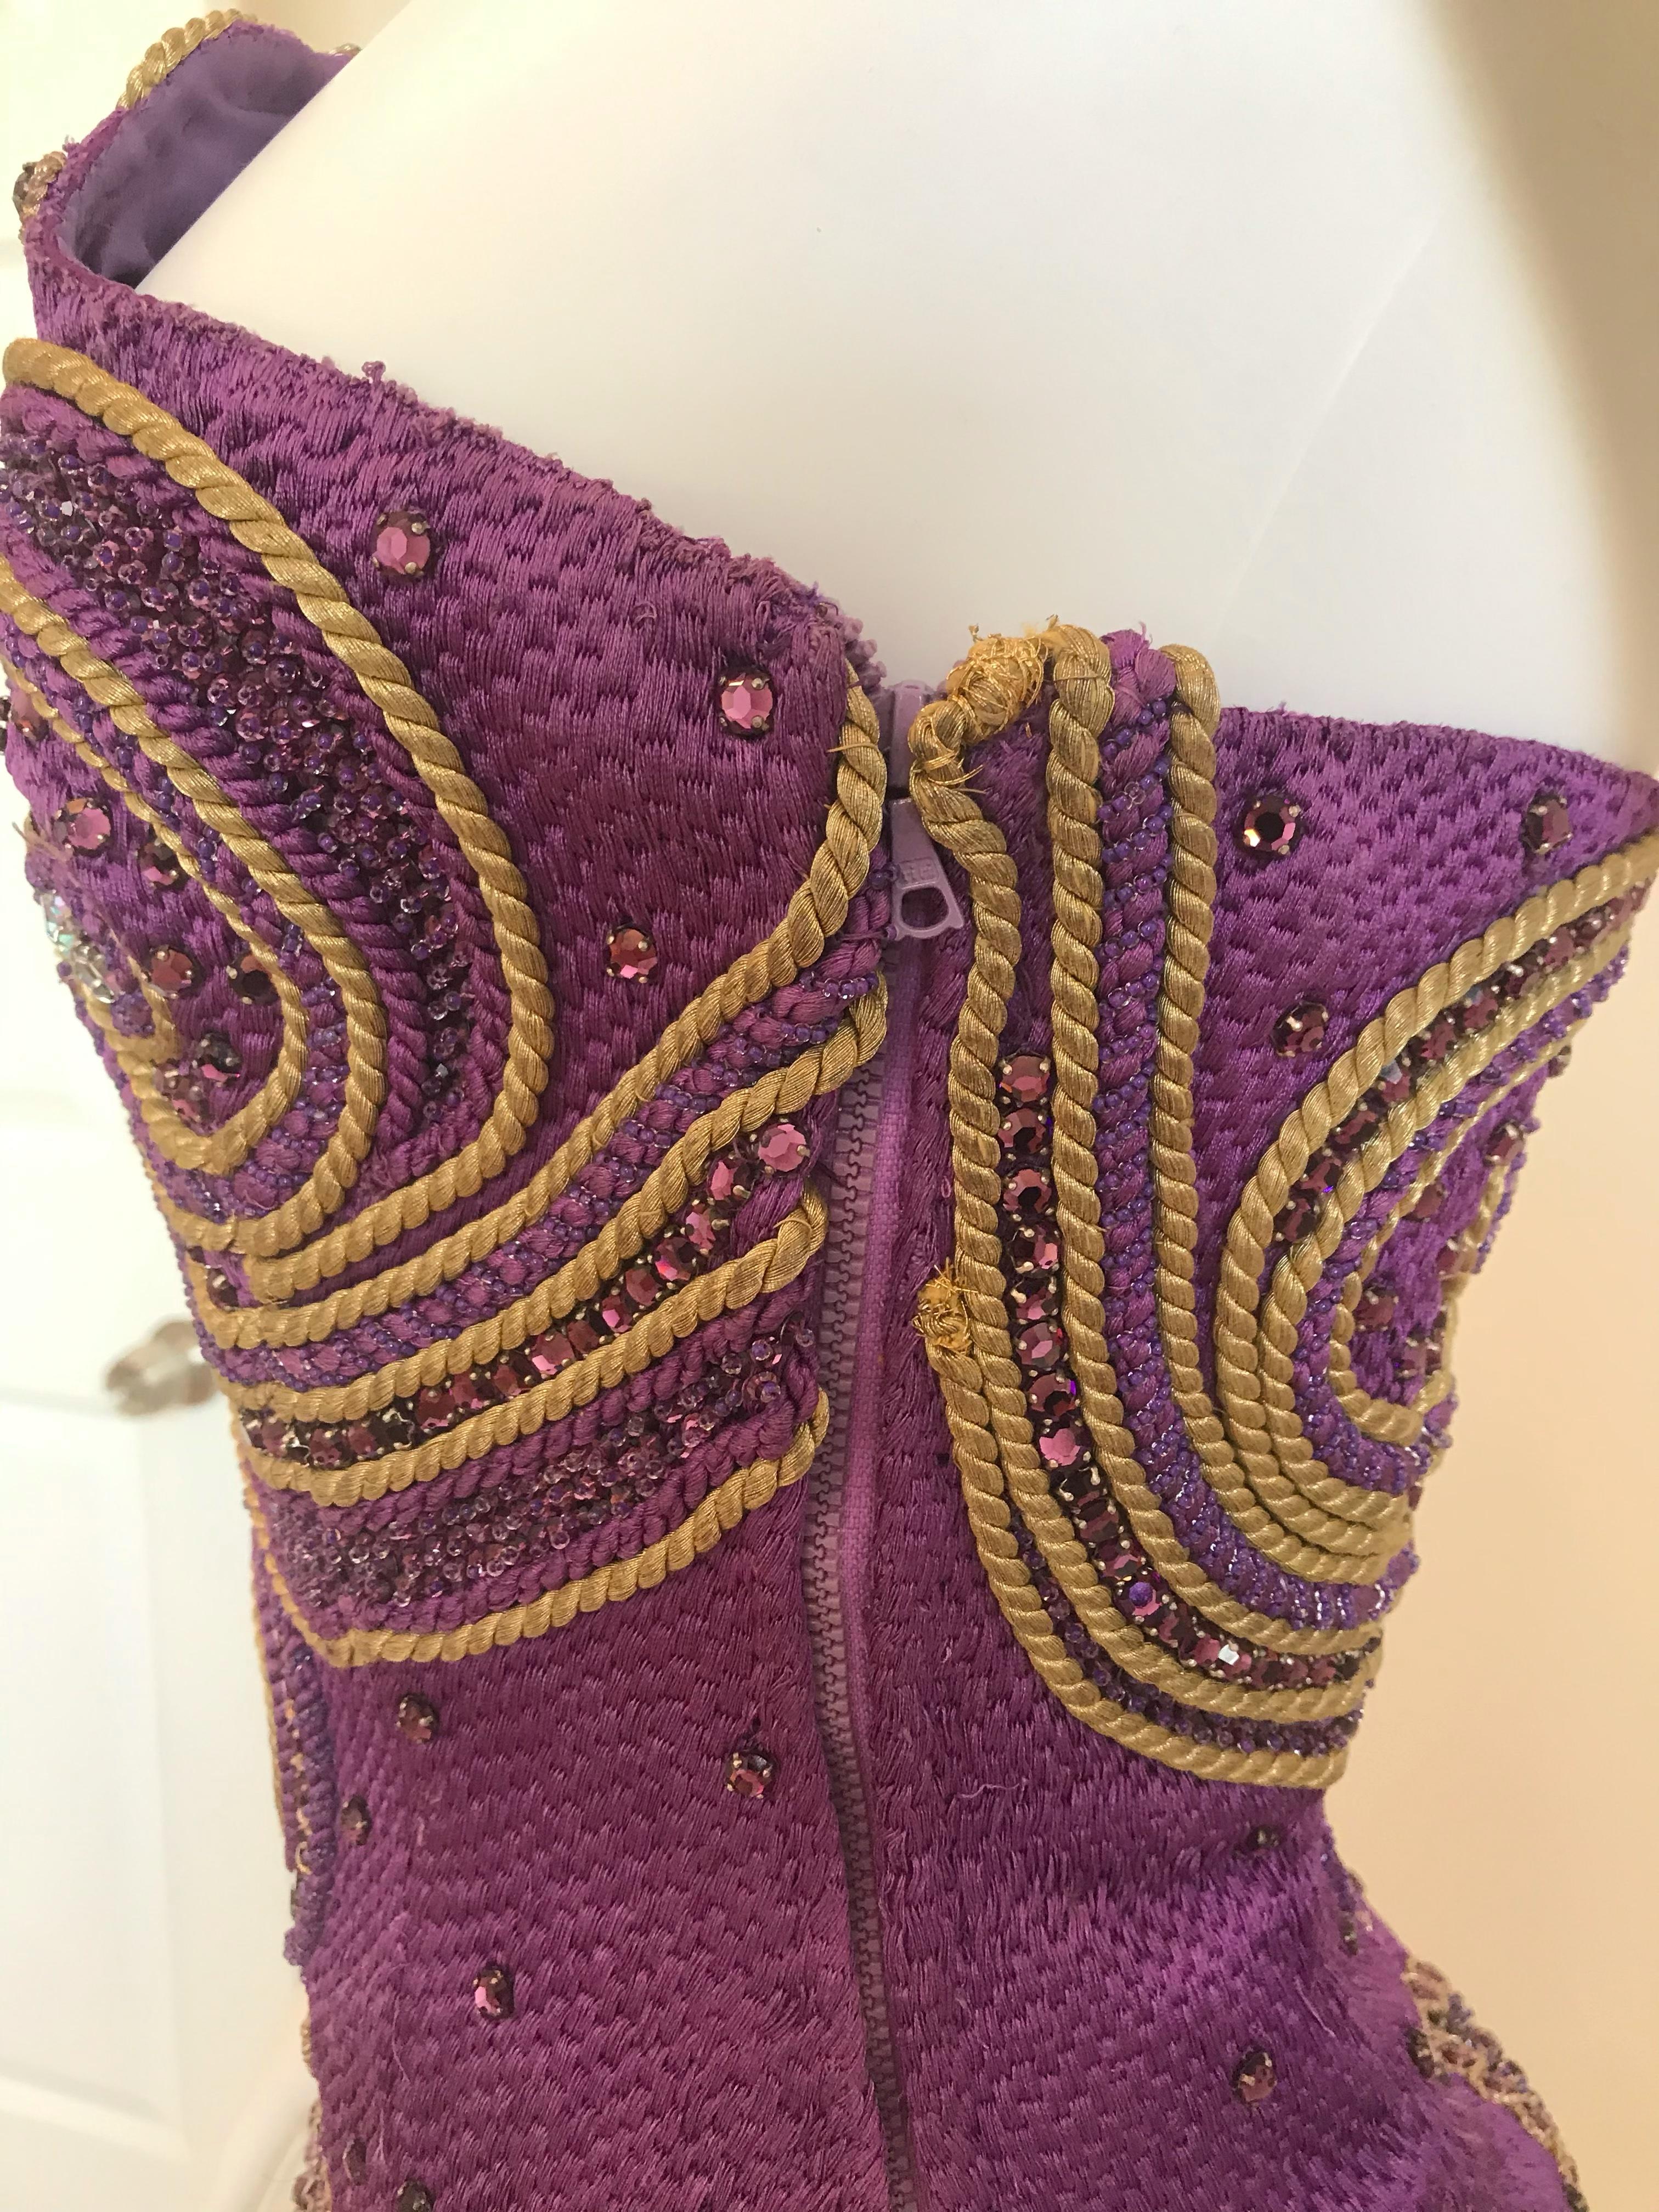 Gianni Versace Couture Purple & Gold Embellished & Embroidered Bustier/Corset For Sale 2